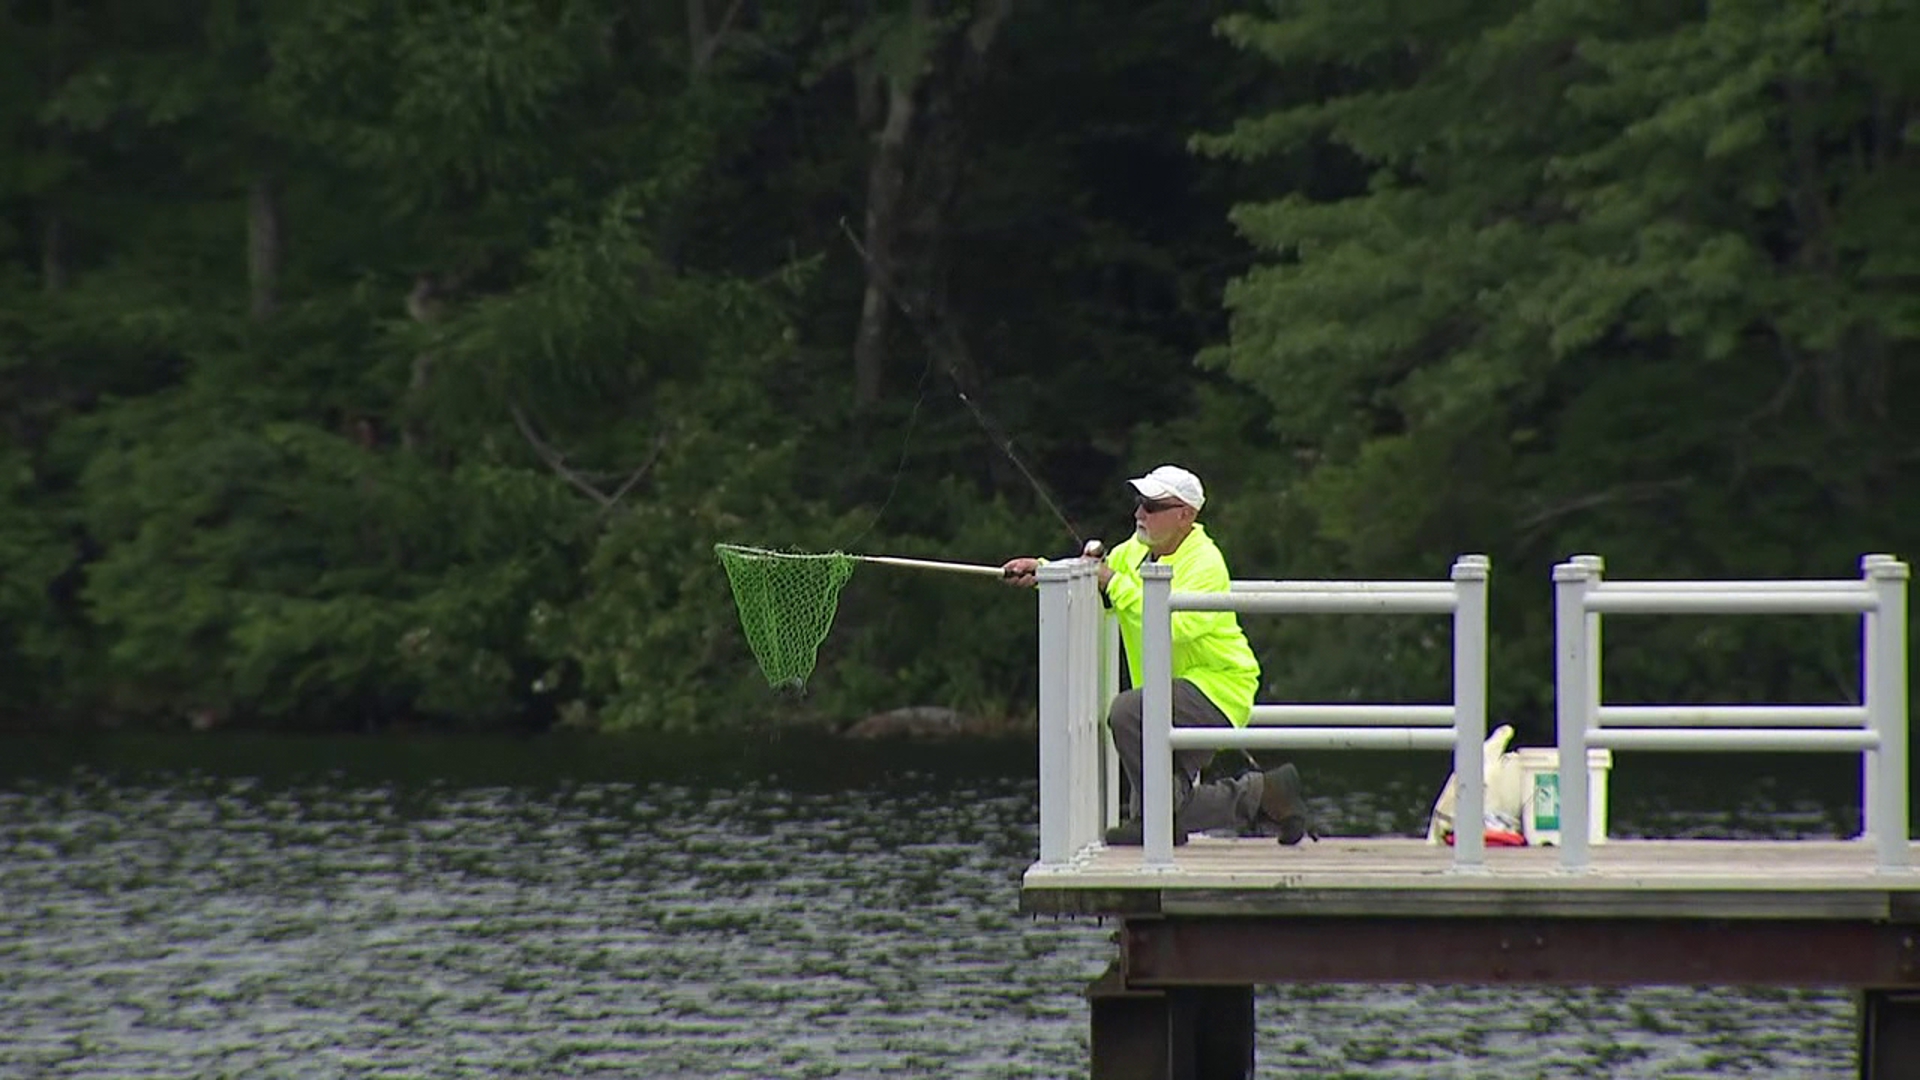 There are lots of ways to spend a holiday; some folks head outdoors to fish. Newswatch 16's Emily Kress takes us to Tobyhanna State Park in Monroe County.